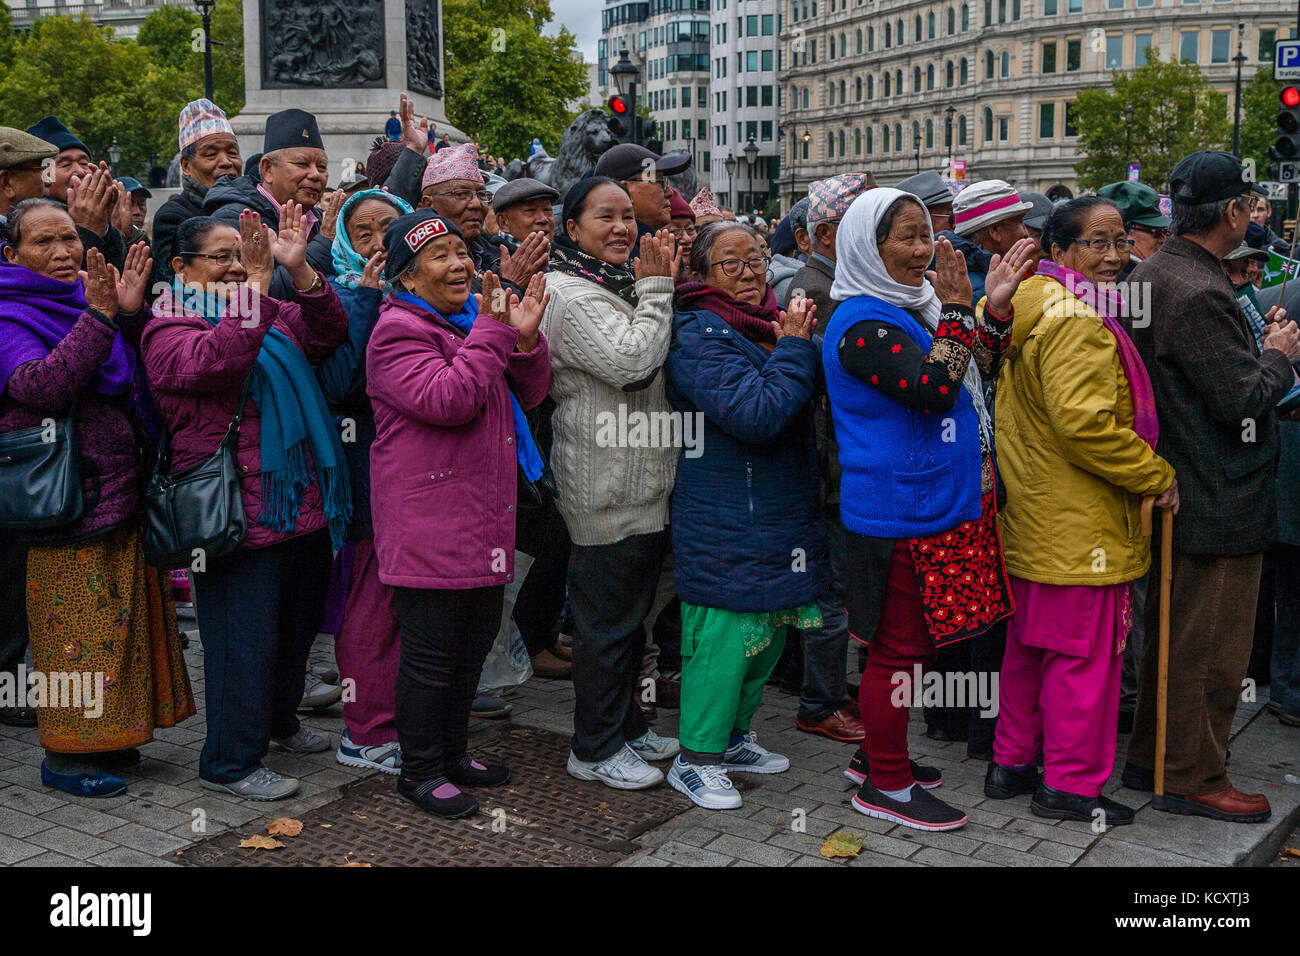 London, UK. 7th October 2017. Ghurkas and Nepali women clap football fans from across the Uk marching against extremism under the banner of the FLA (football lads alliance) Credit: Grant Rooney/Alamy Live News Stock Photo